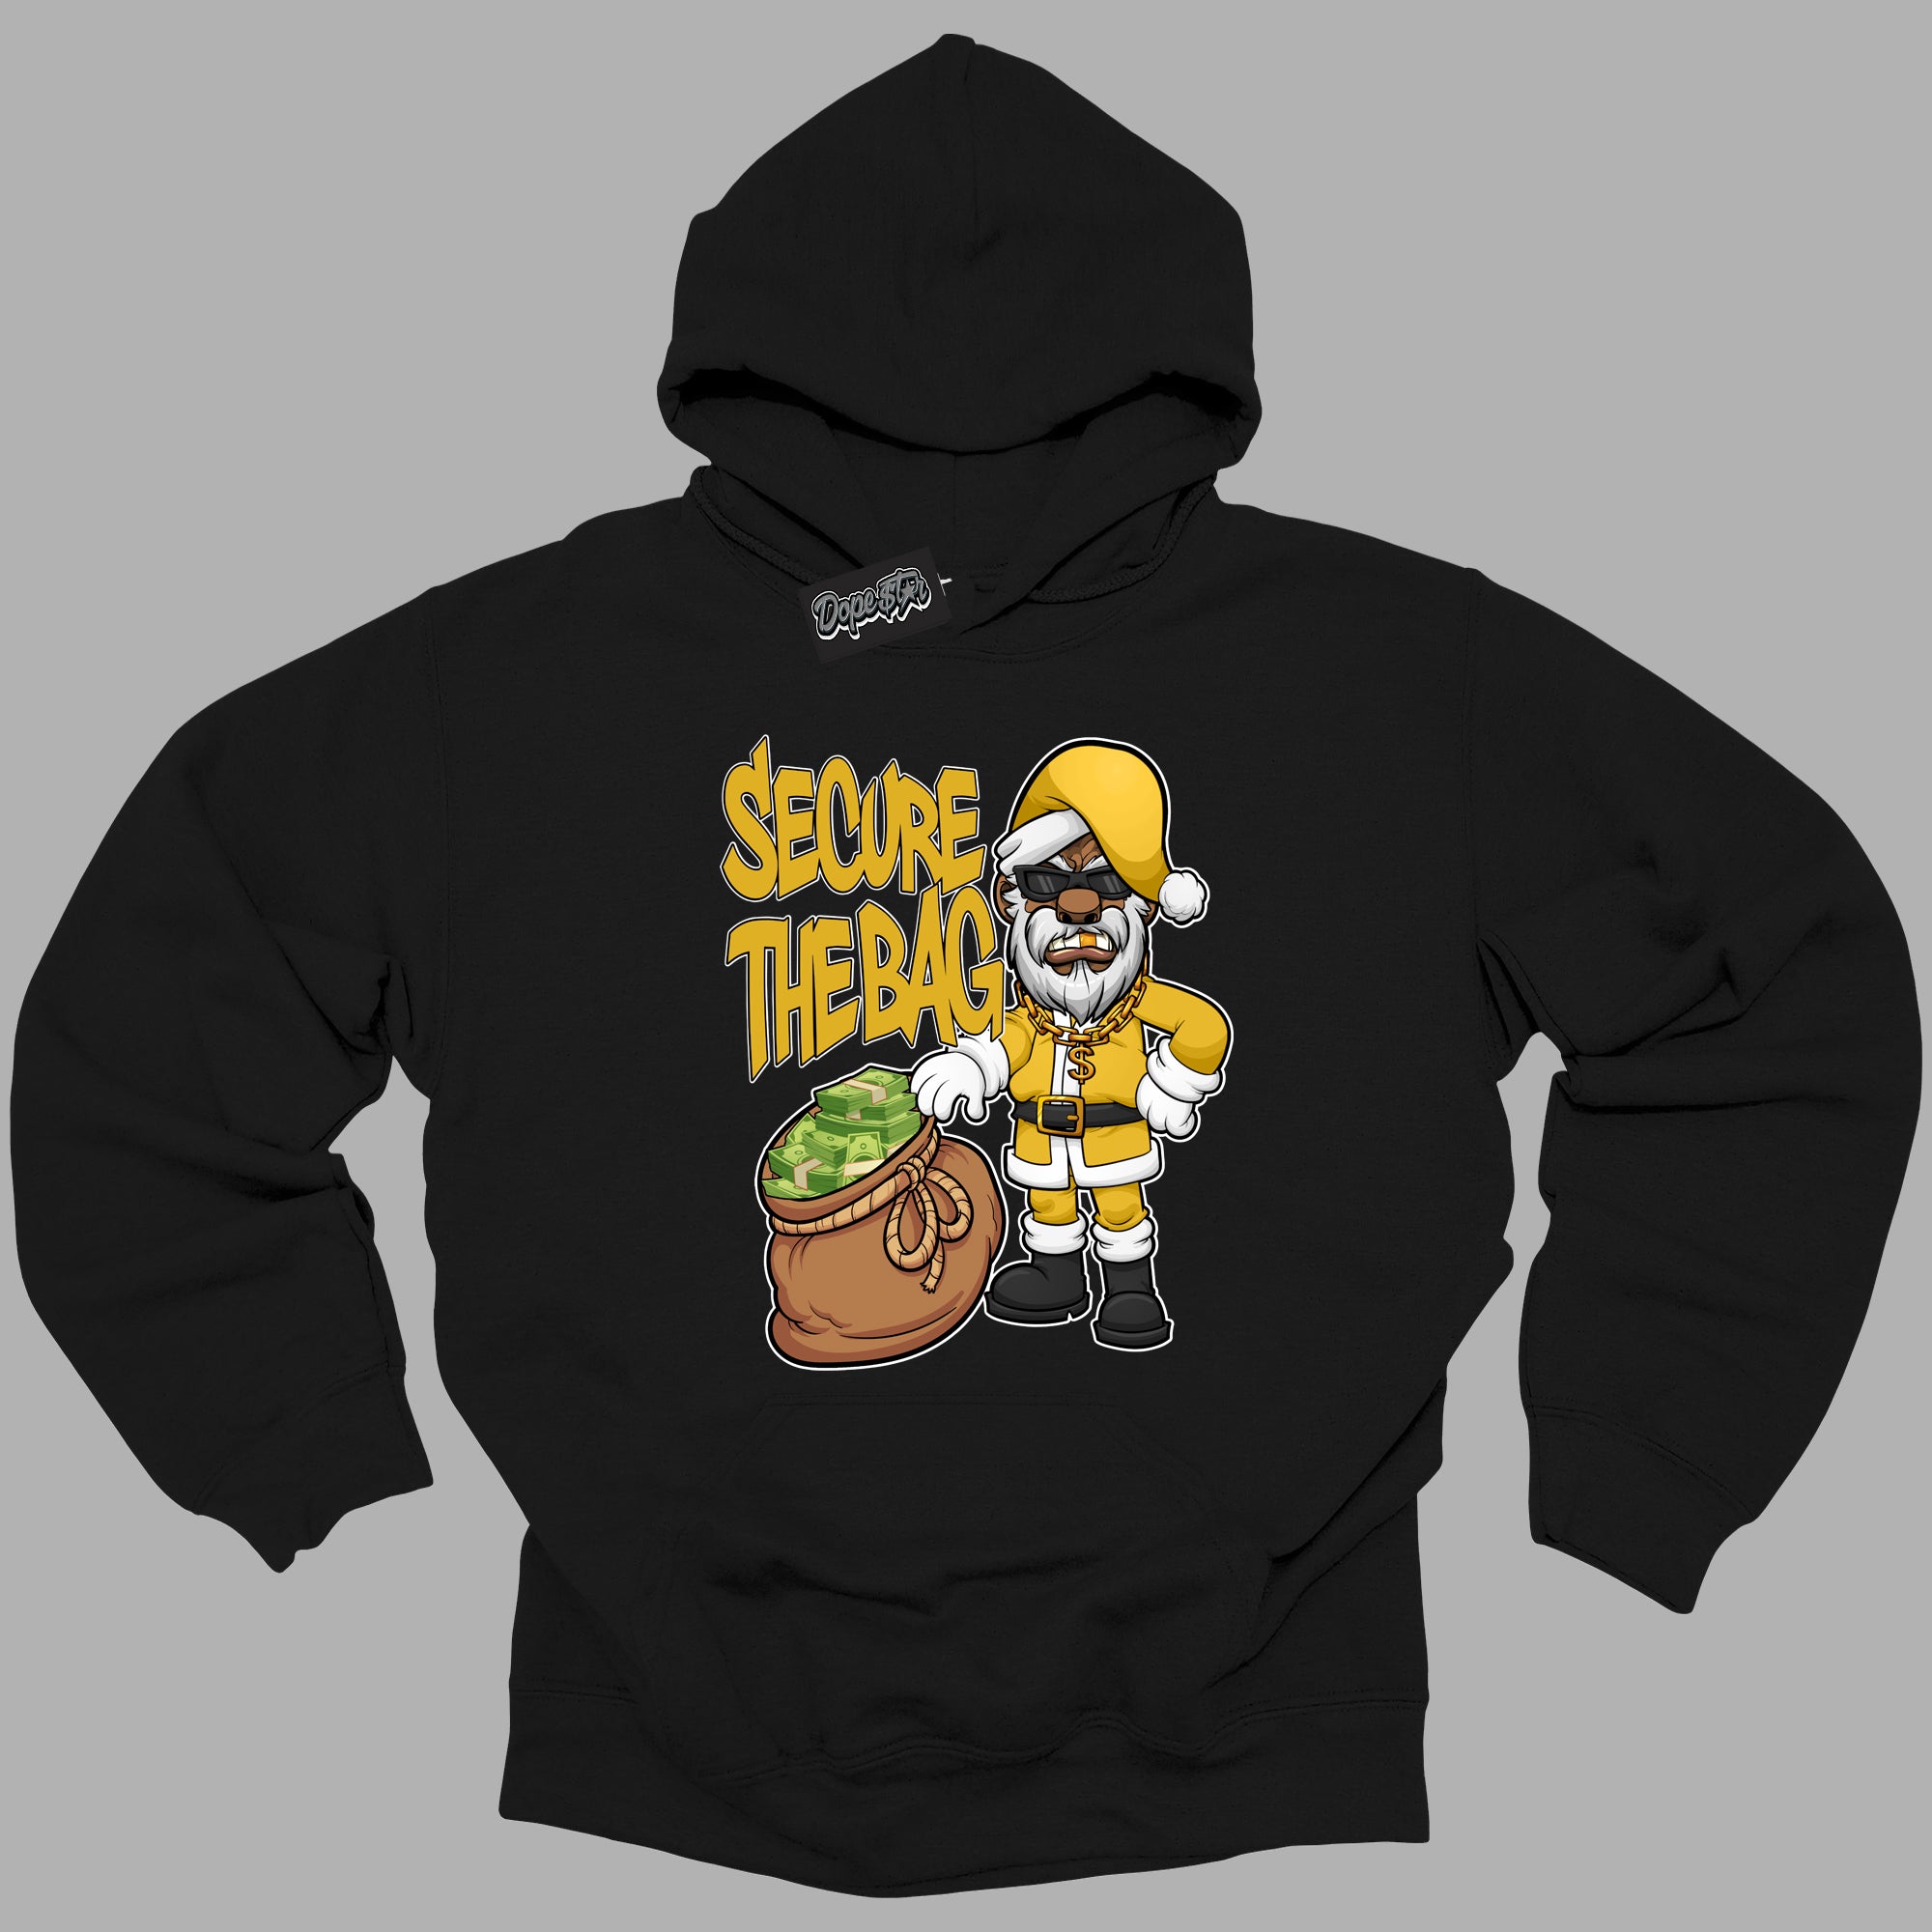 Cool Black Hoodie with “ Secure The Bag Santa ”  design that Perfectly Matches Yellow Ochre 6s Sneakers.